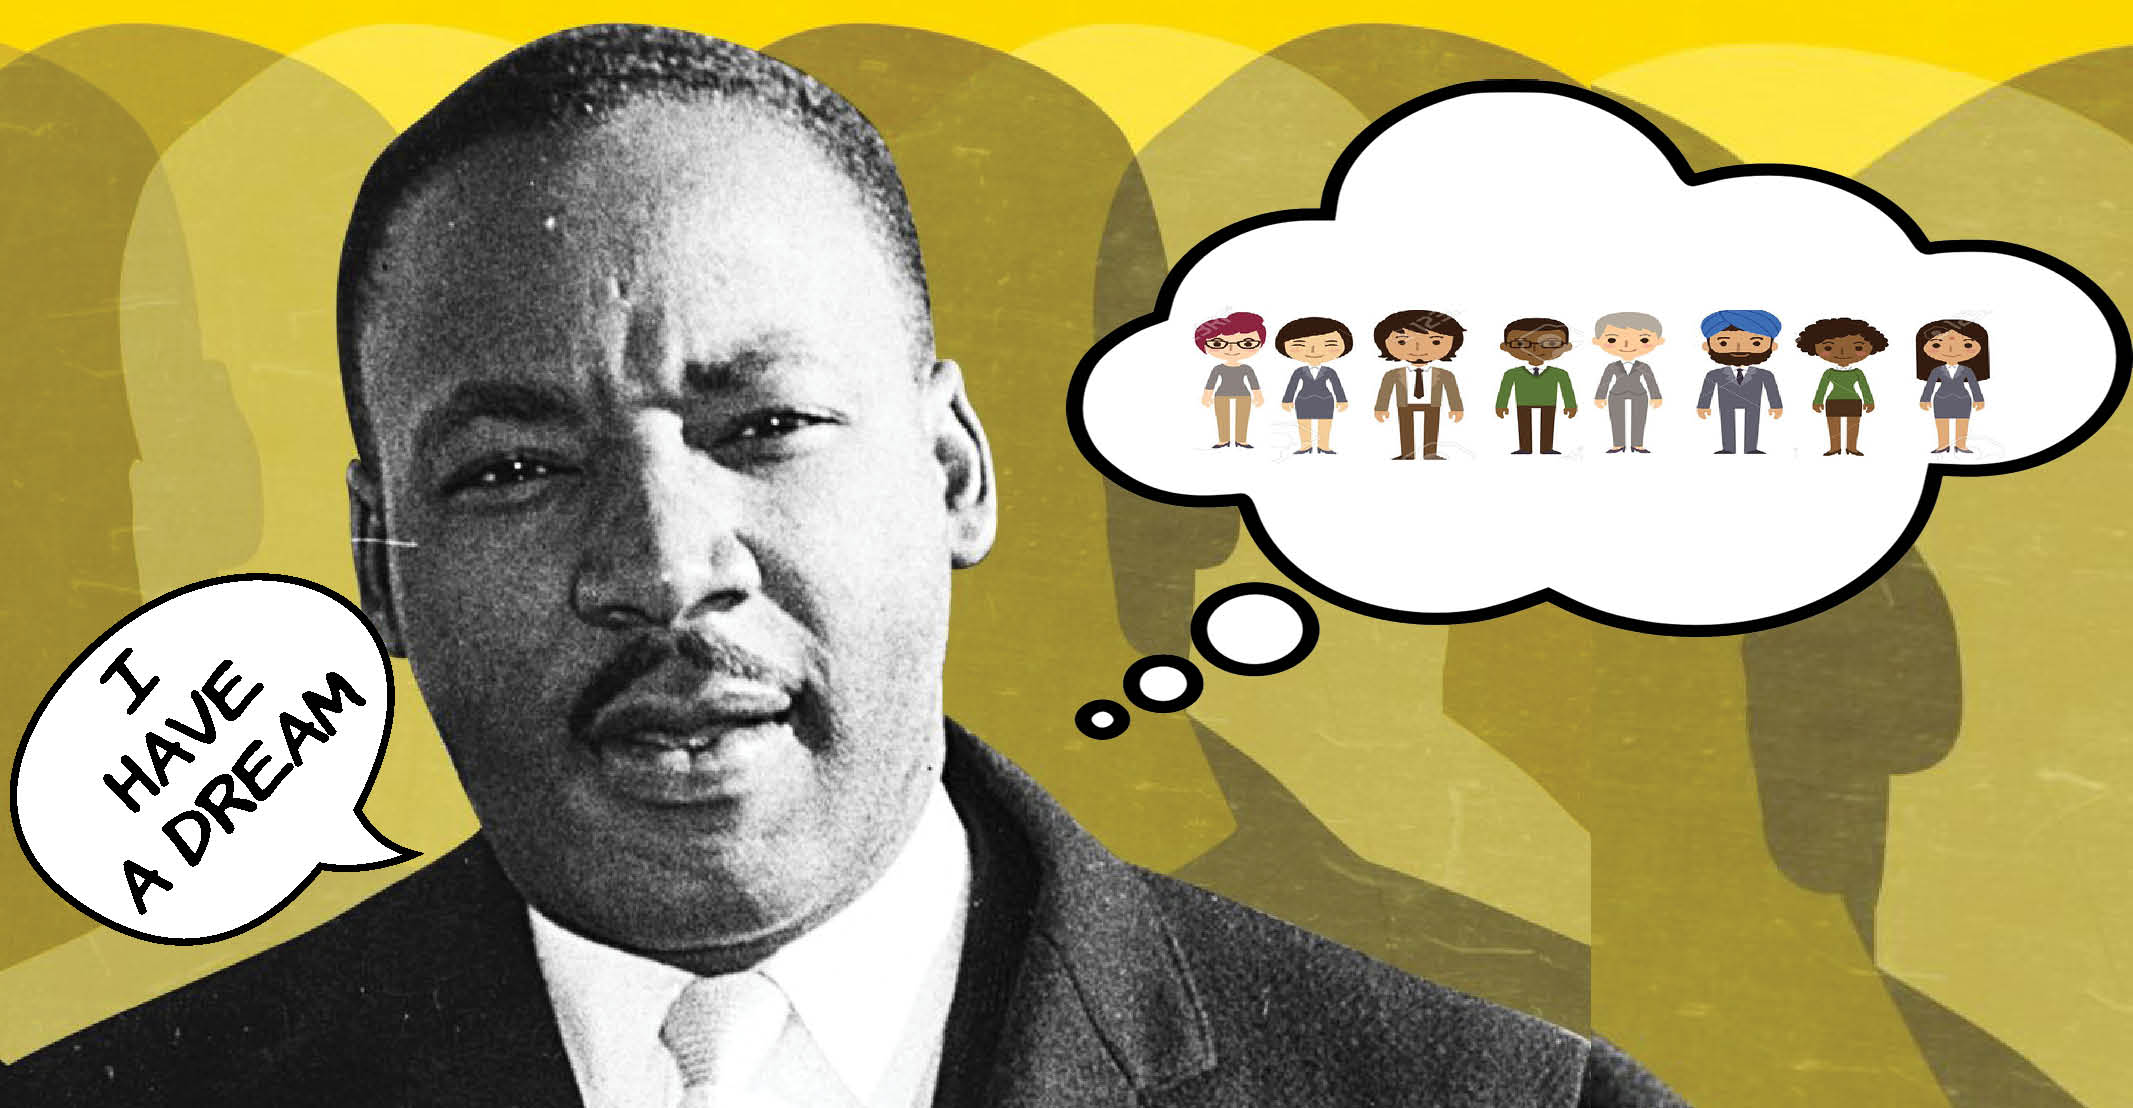 Would Martin Luther King Jr. hire a diverse staff if he couldn't judge a character by the color of their skin?